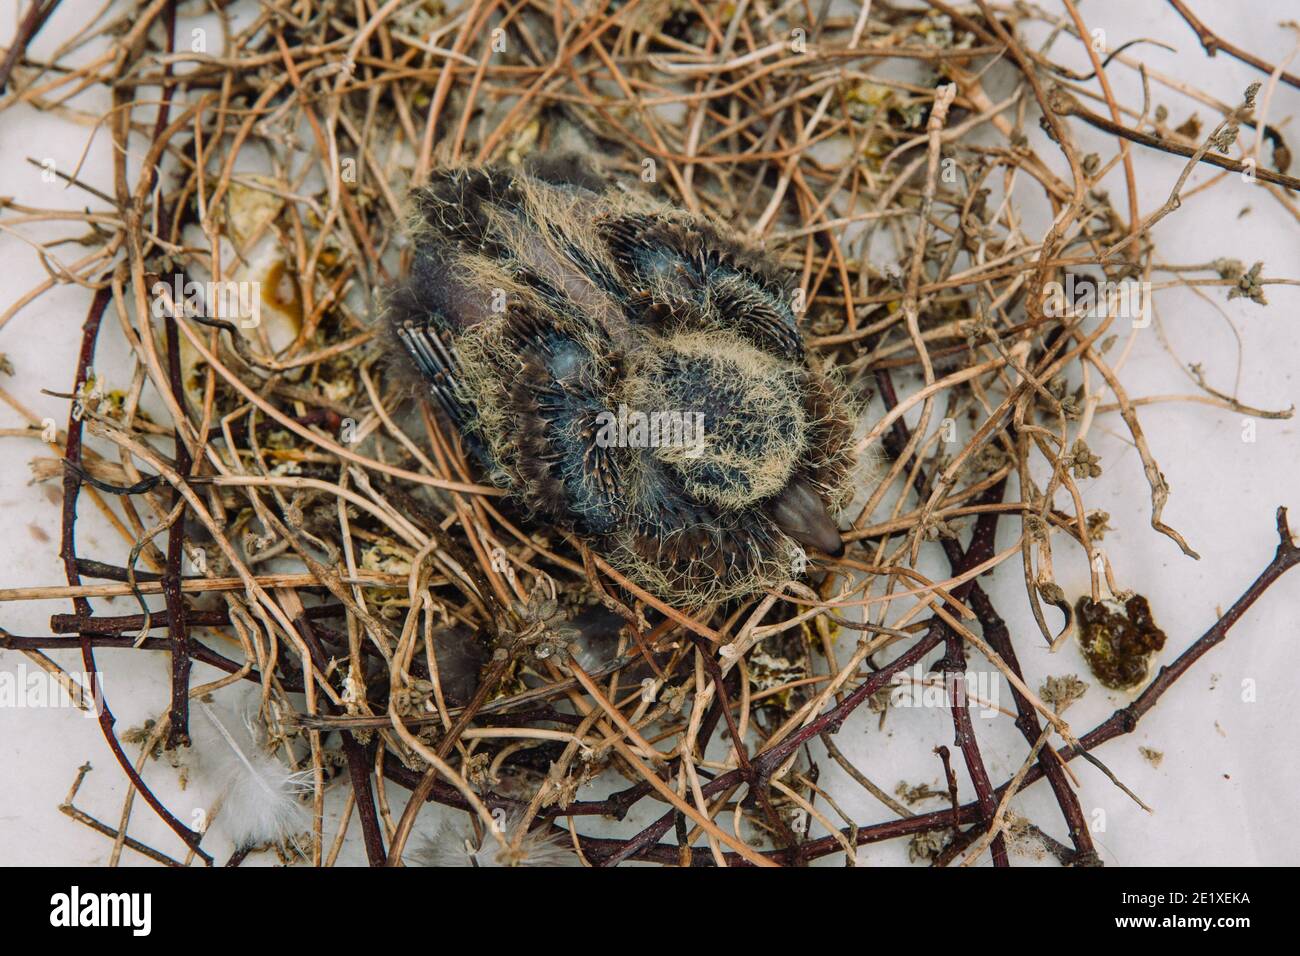 Squab (baby dove) in bird's nest waiting for its parents to bring food. Black and yellow feathers emerging from dove chick. Stock Photo